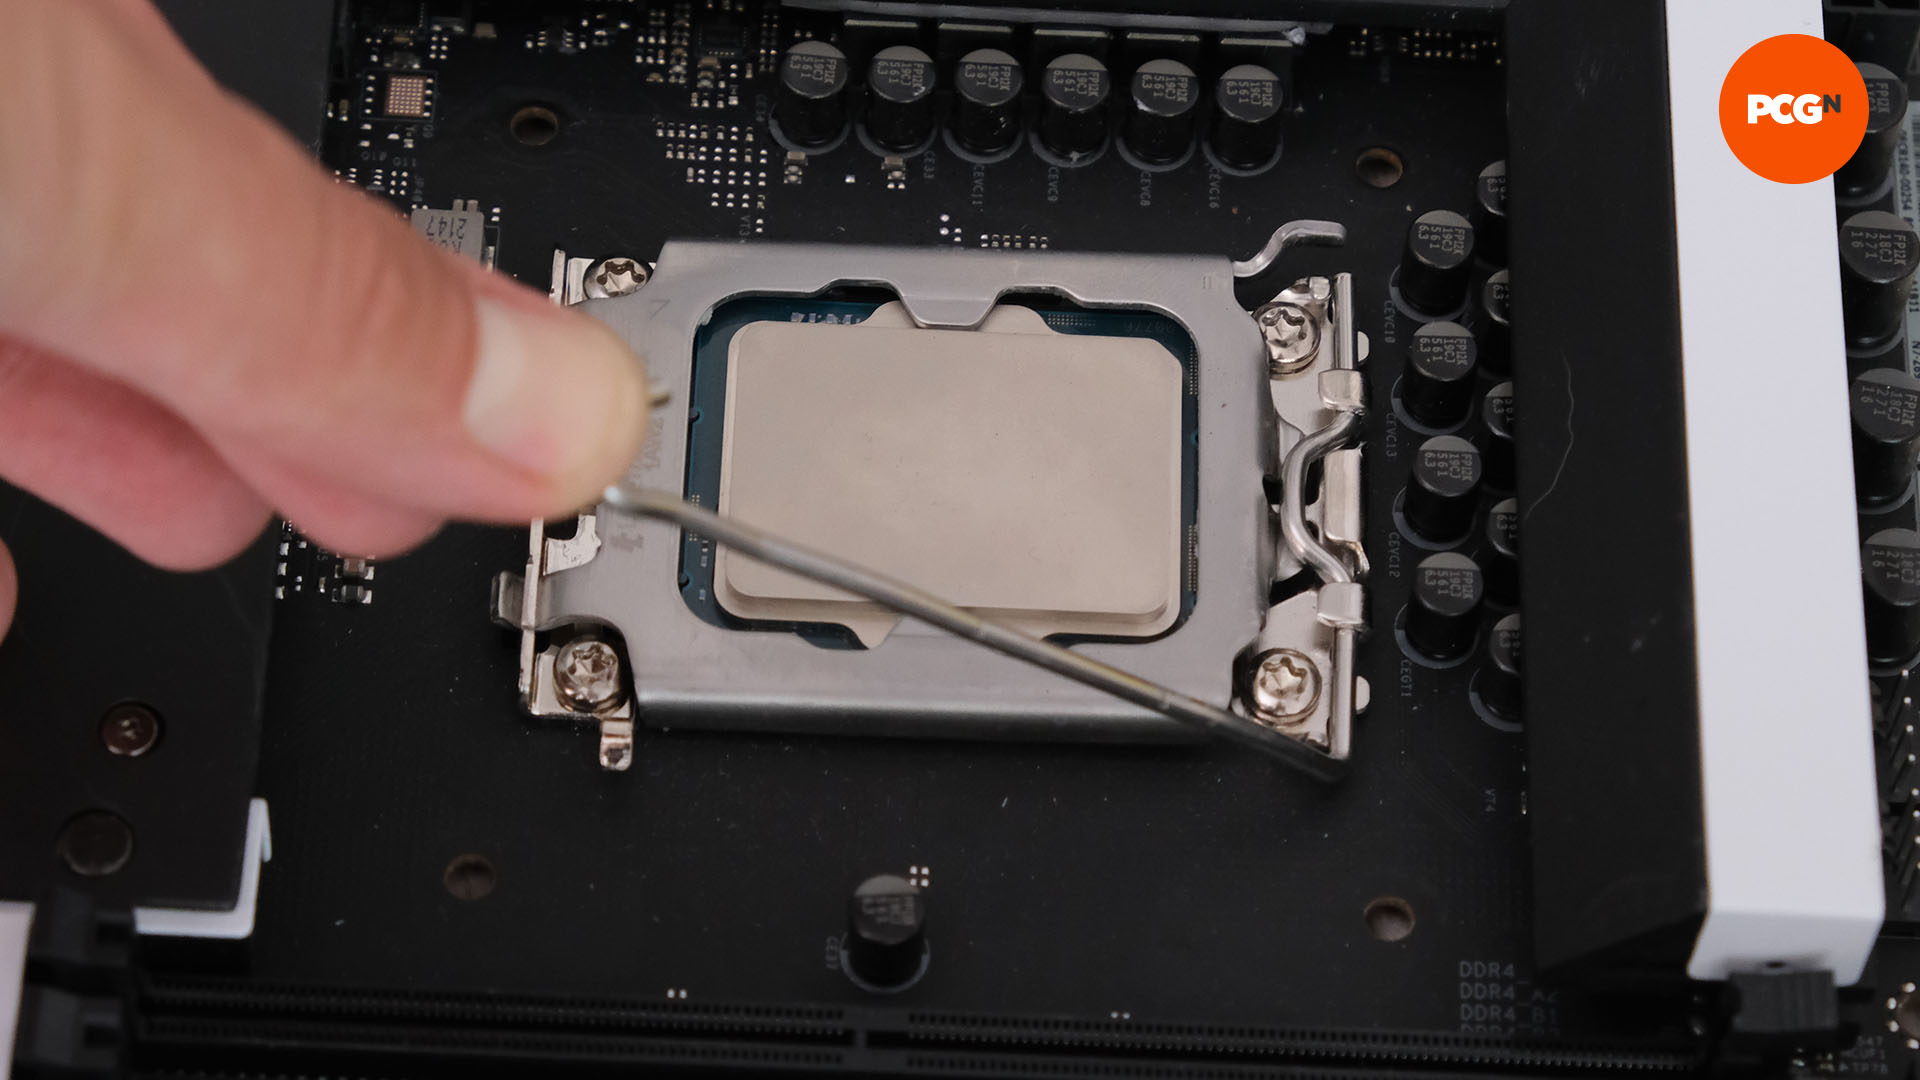 How to build a gaming PC: Lower lever on Intel CPU socket